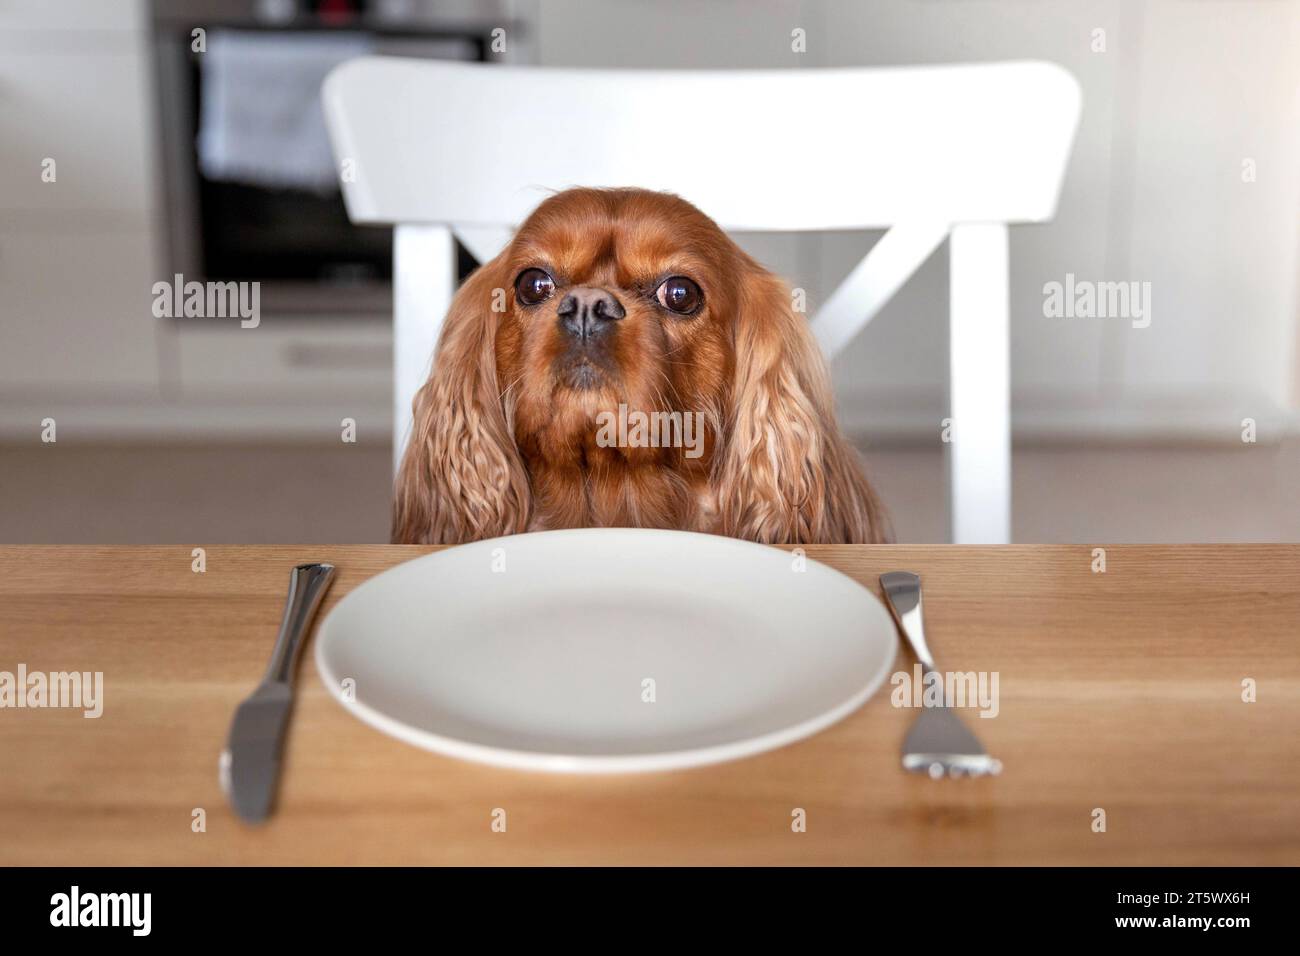 Portrait of a cute dog waiting for meal by the kitchen table Stock Photo